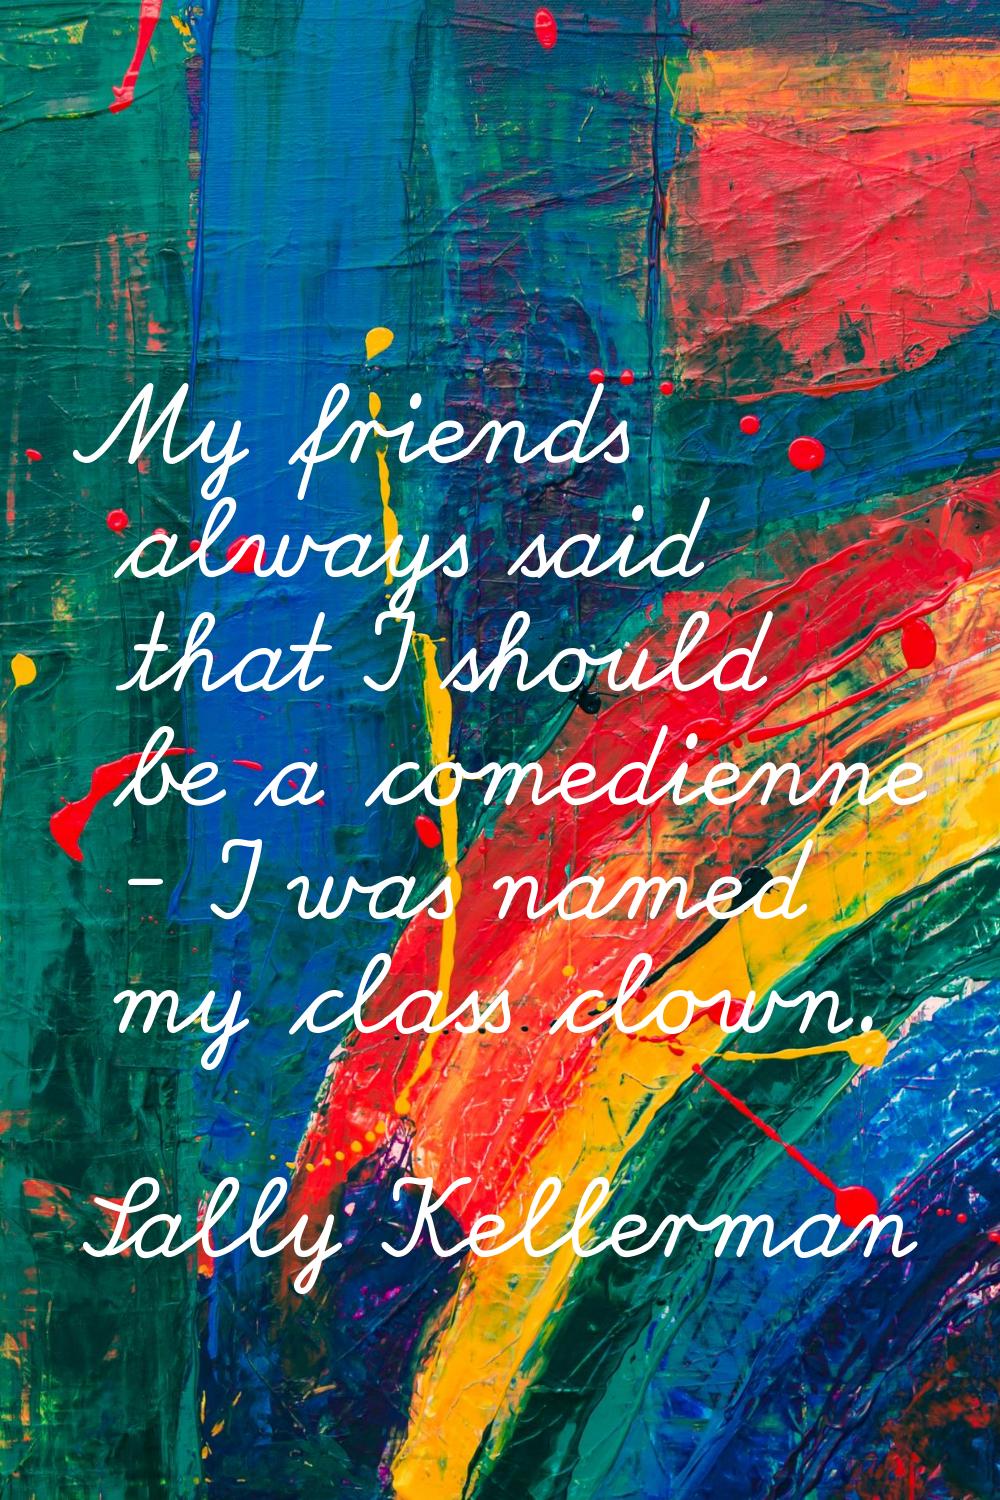 My friends always said that I should be a comedienne - I was named my class clown.